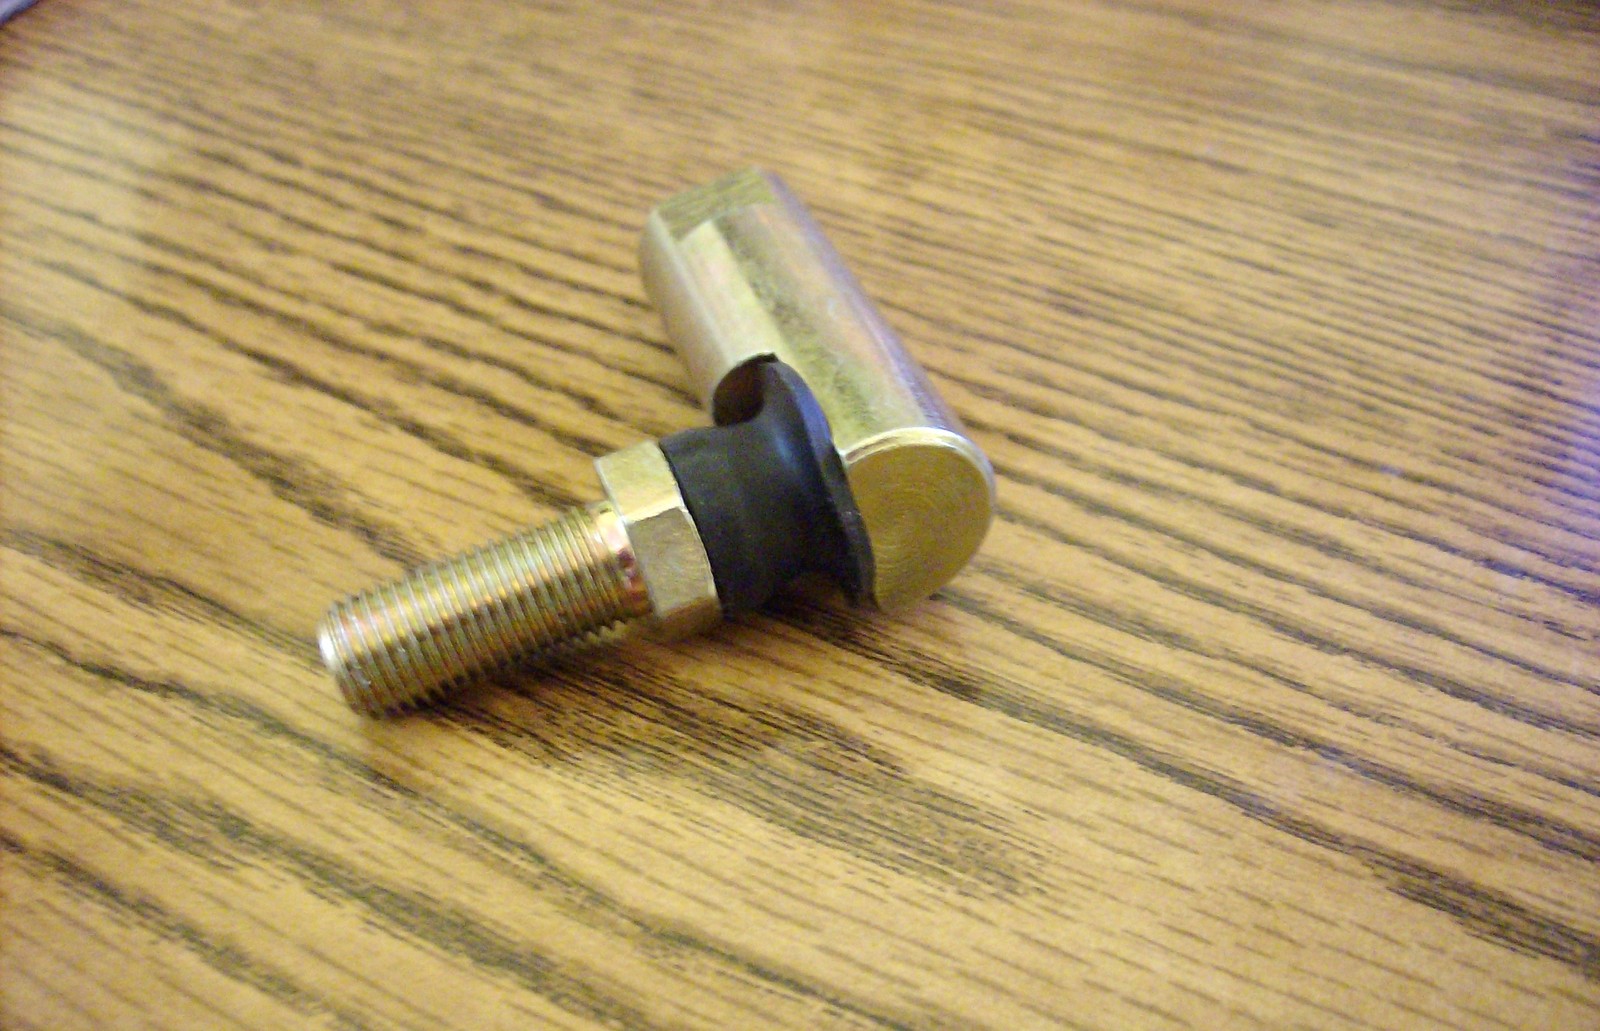 Ball joint for Ariens lawn mower 00336900, 02917100 - $7.04